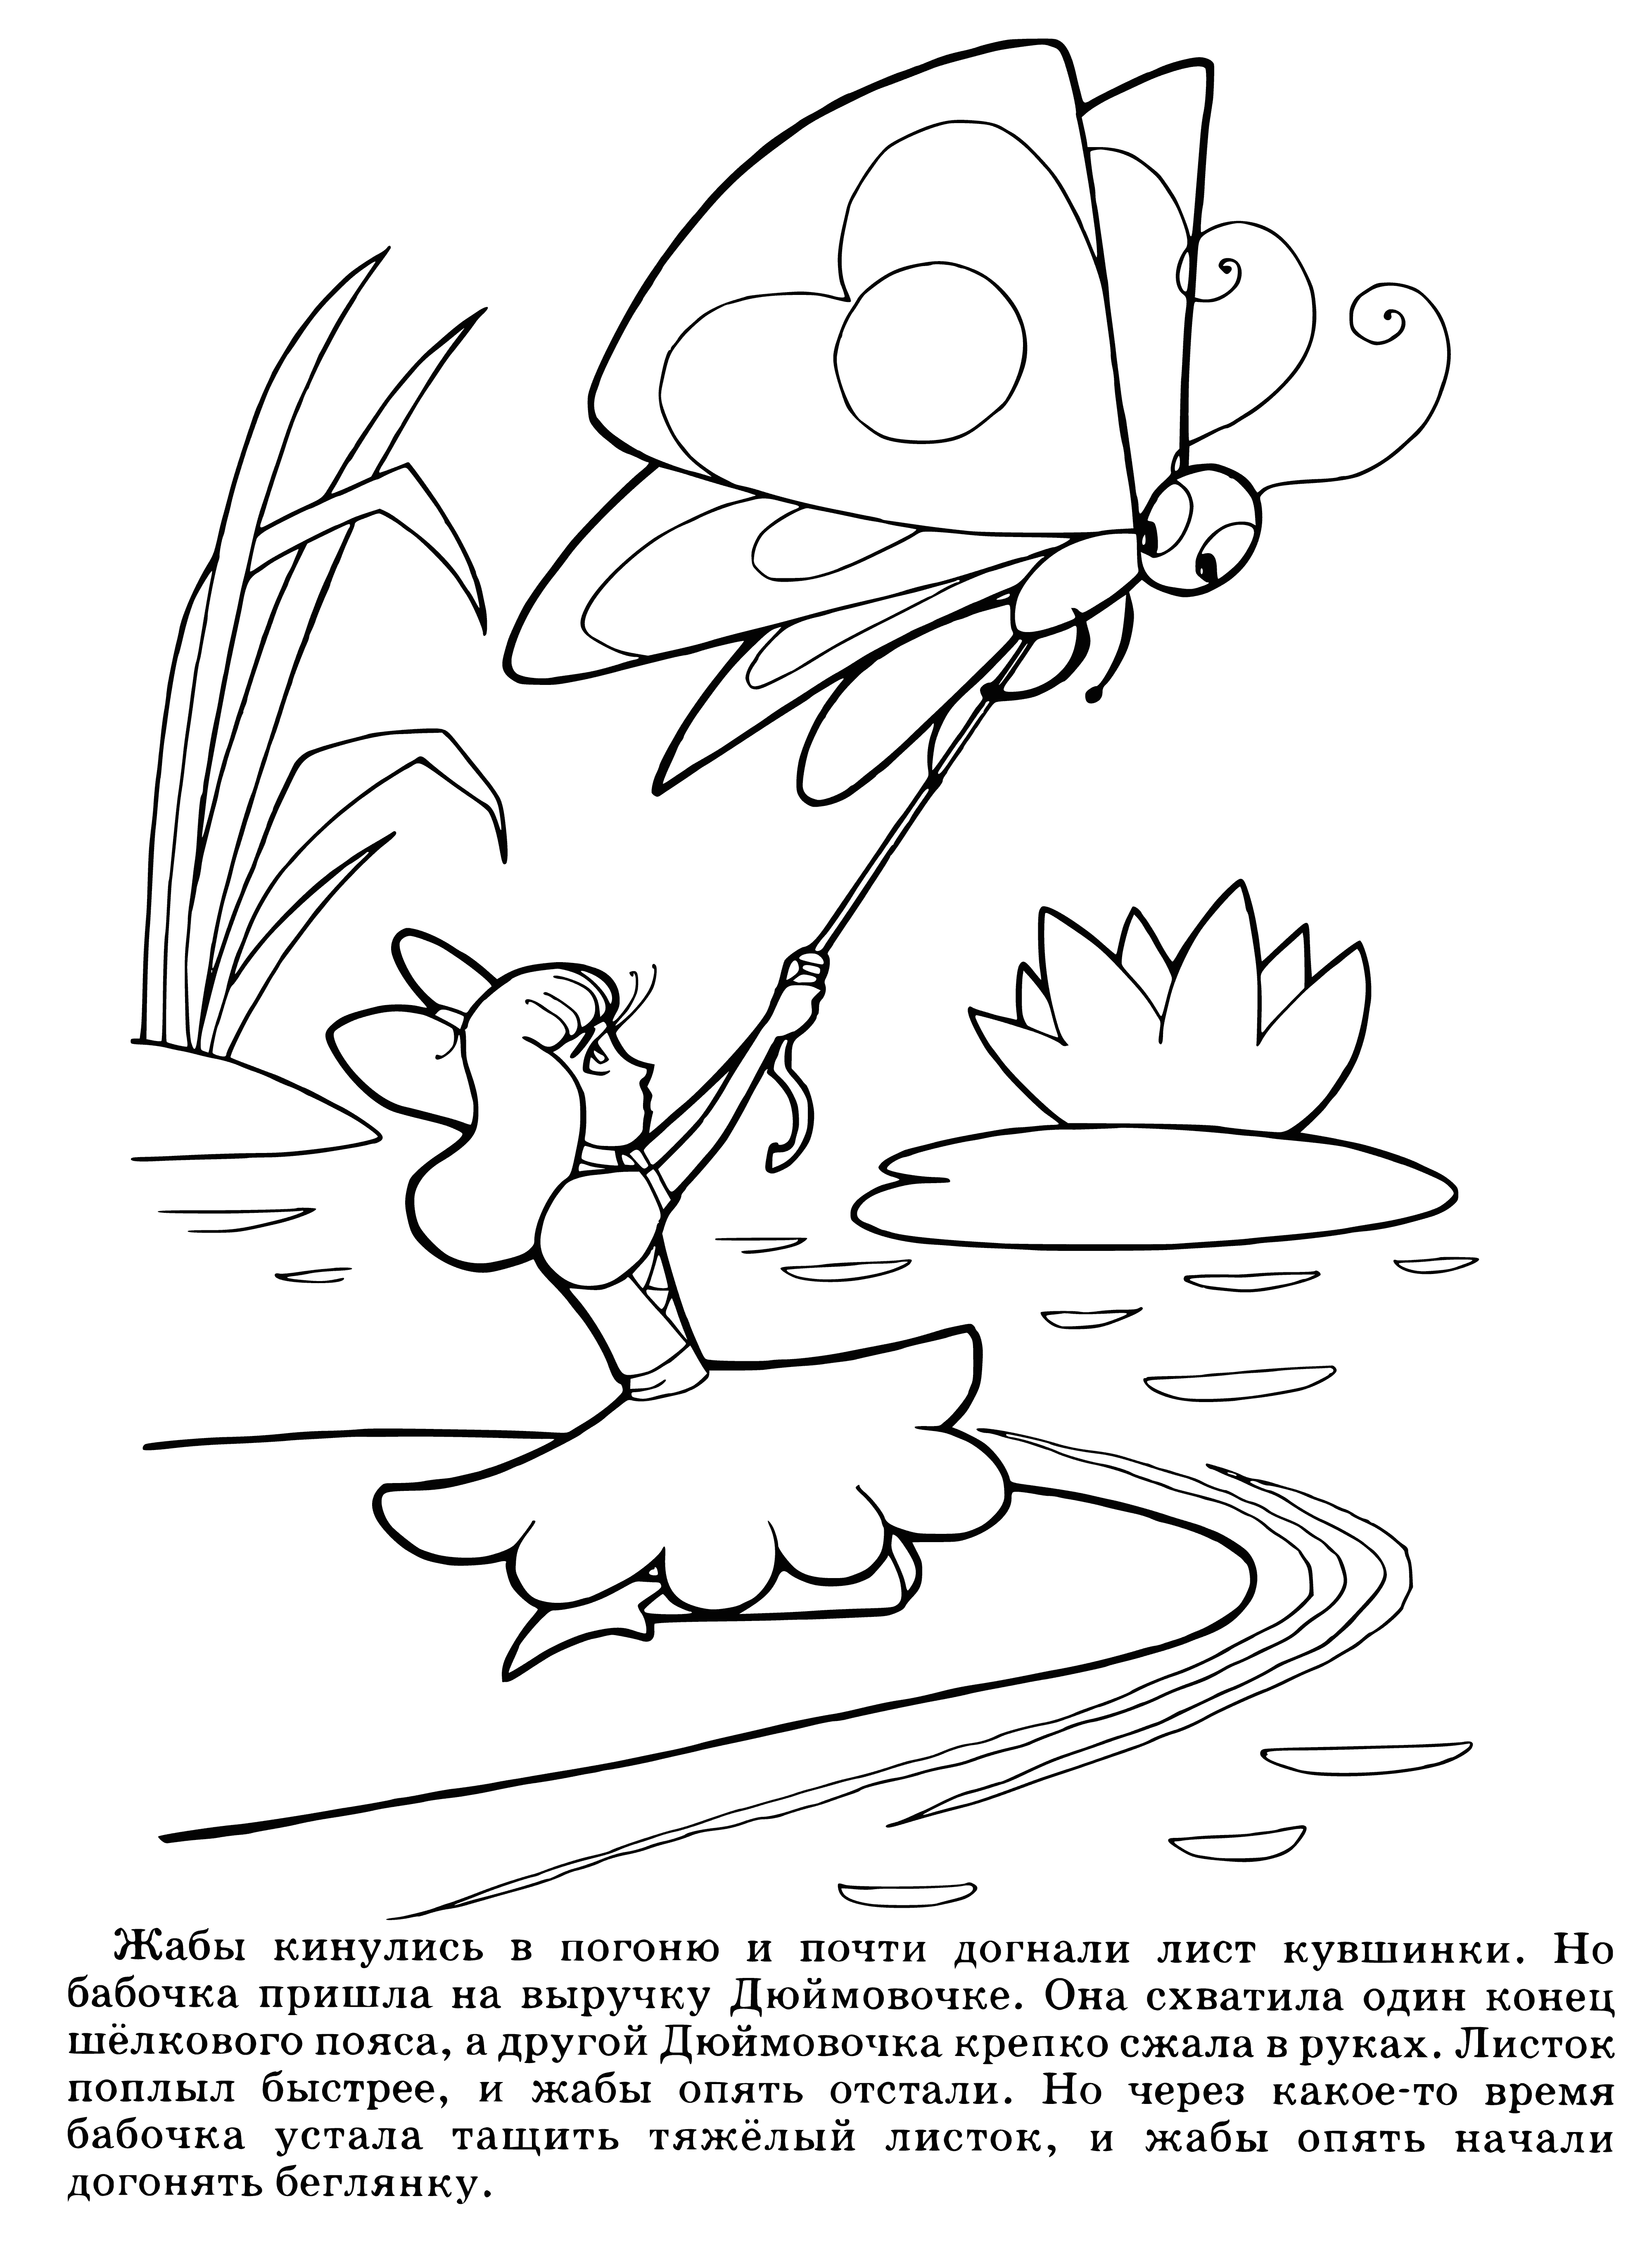 Moth pulls coloring page